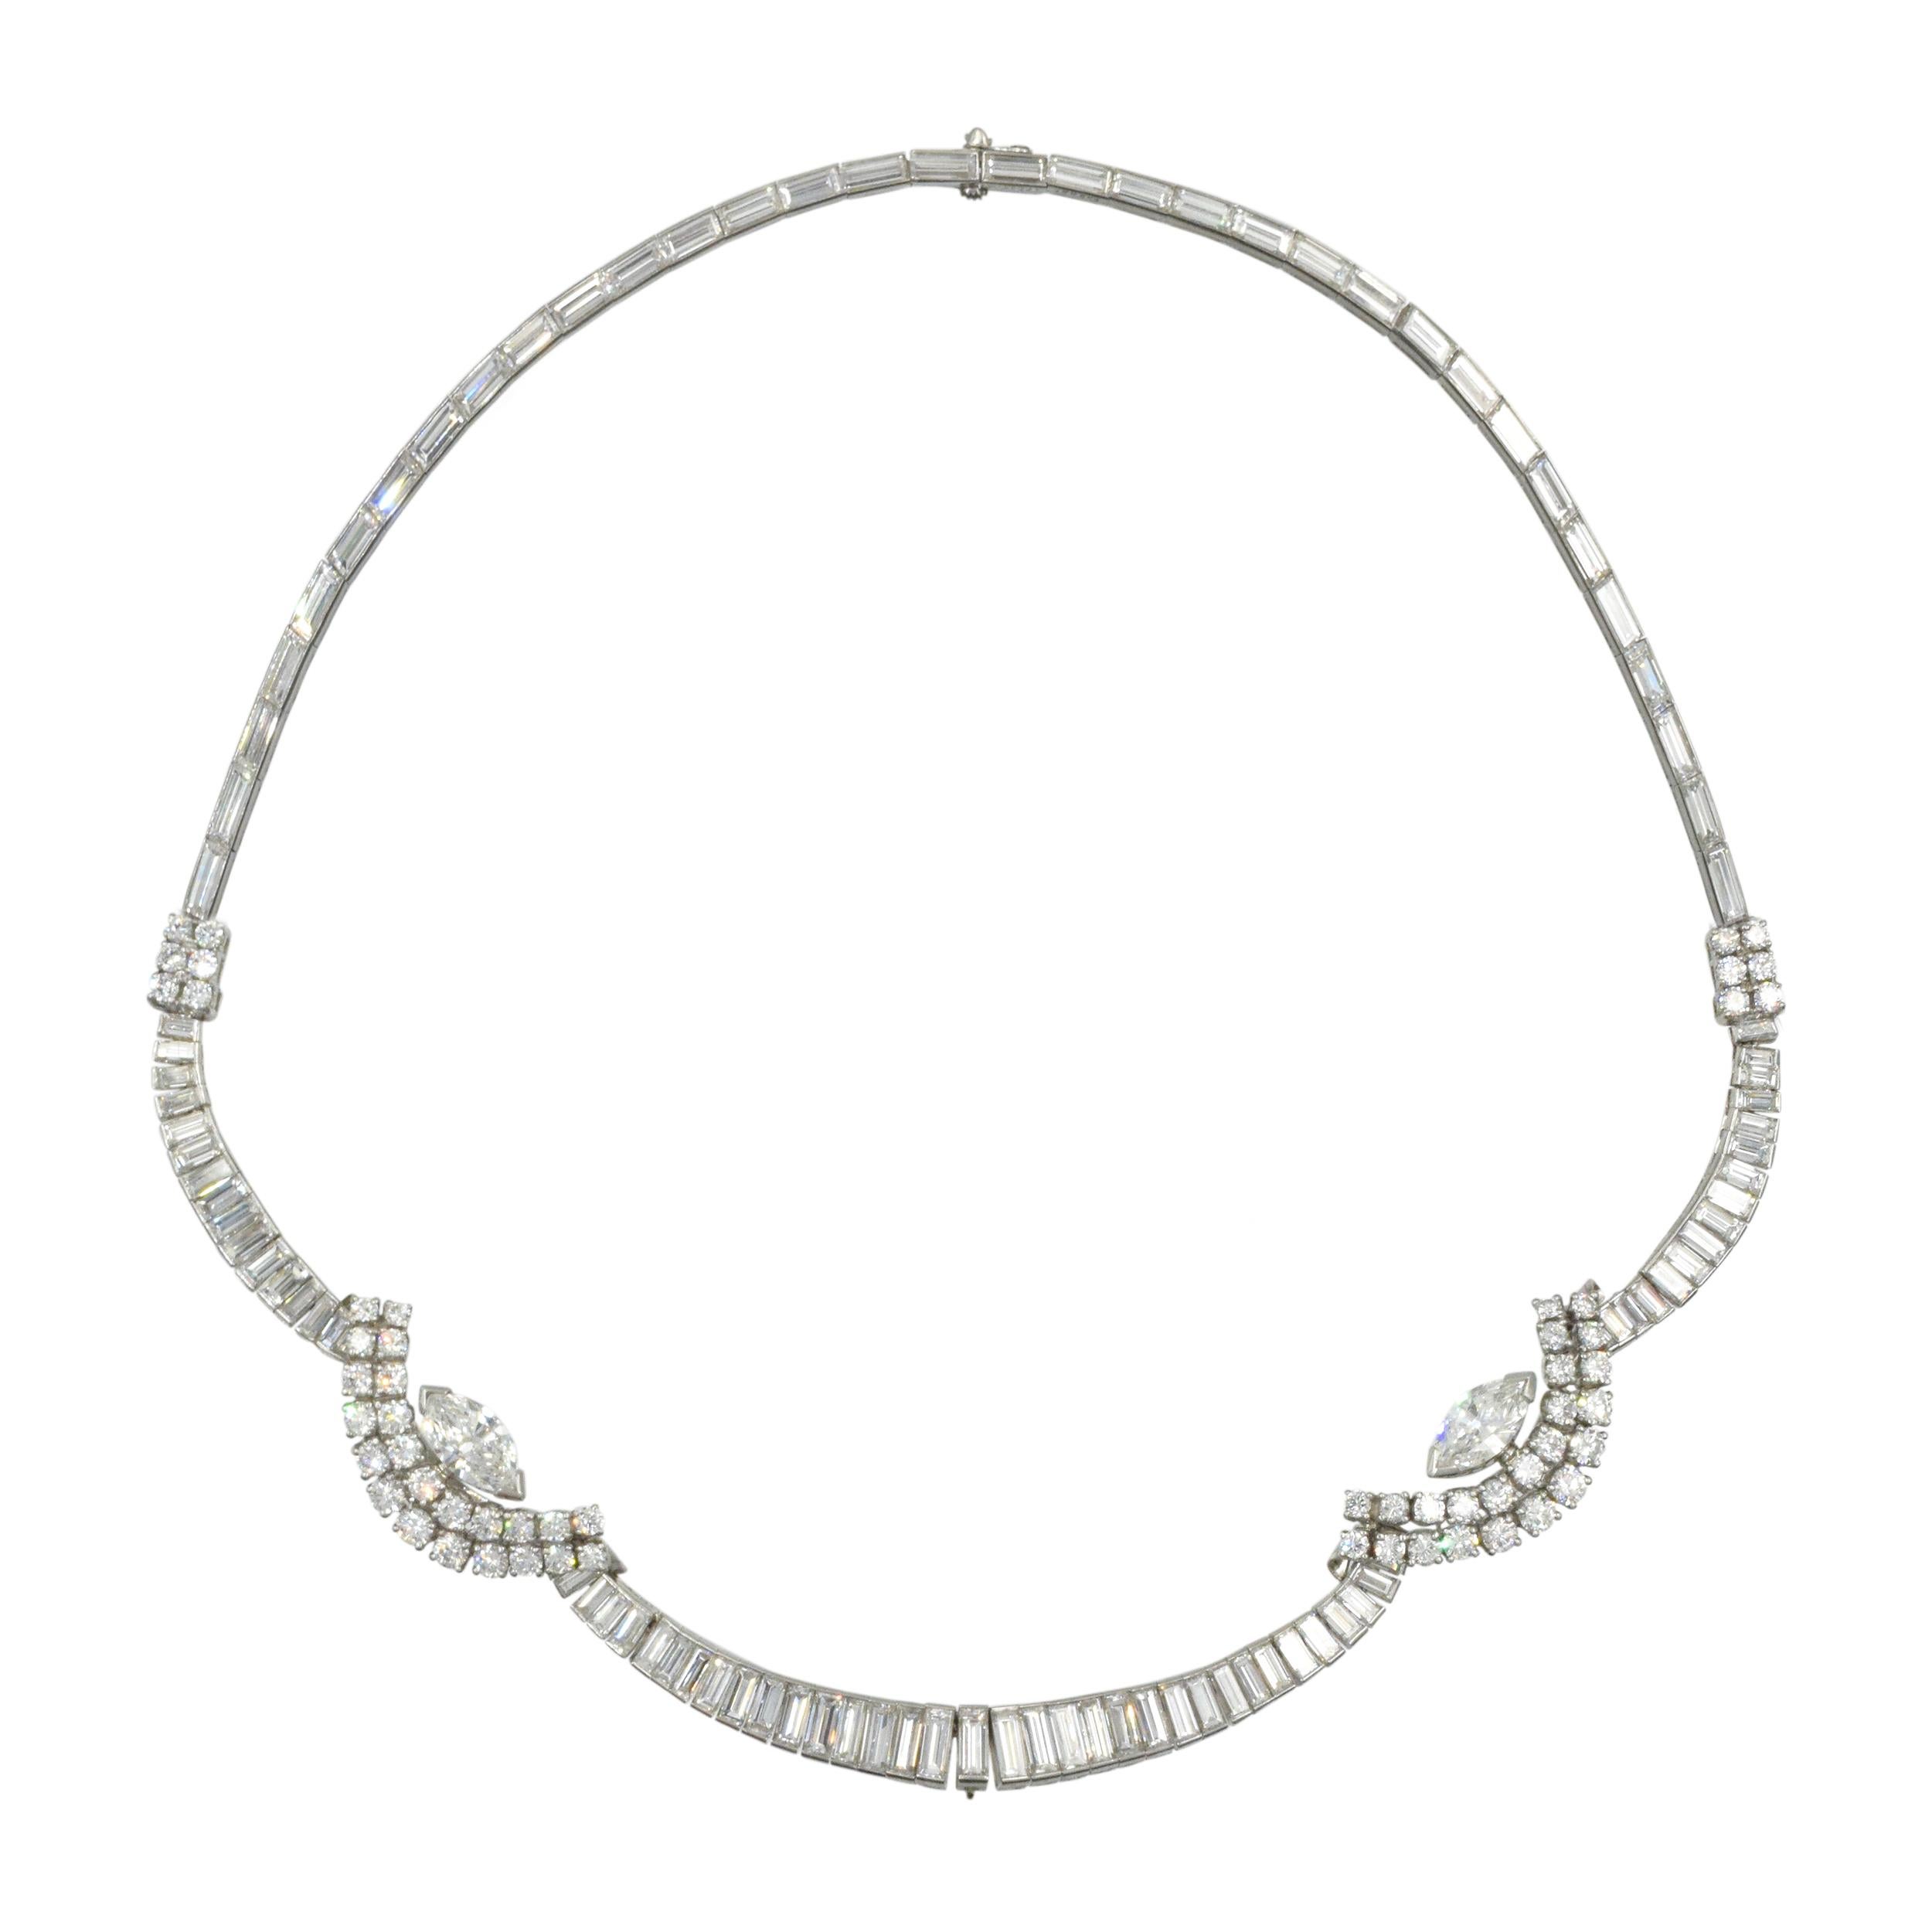 Oscar Heyman Diamond necklace in  platinum. Consisting of 170 baguette cut diamonds and 37 round brilliant cut diamonds. Total diamond weight: is 30 carats   Baguette cut diamonds horizontally channel set around the neck and vertically on the front.